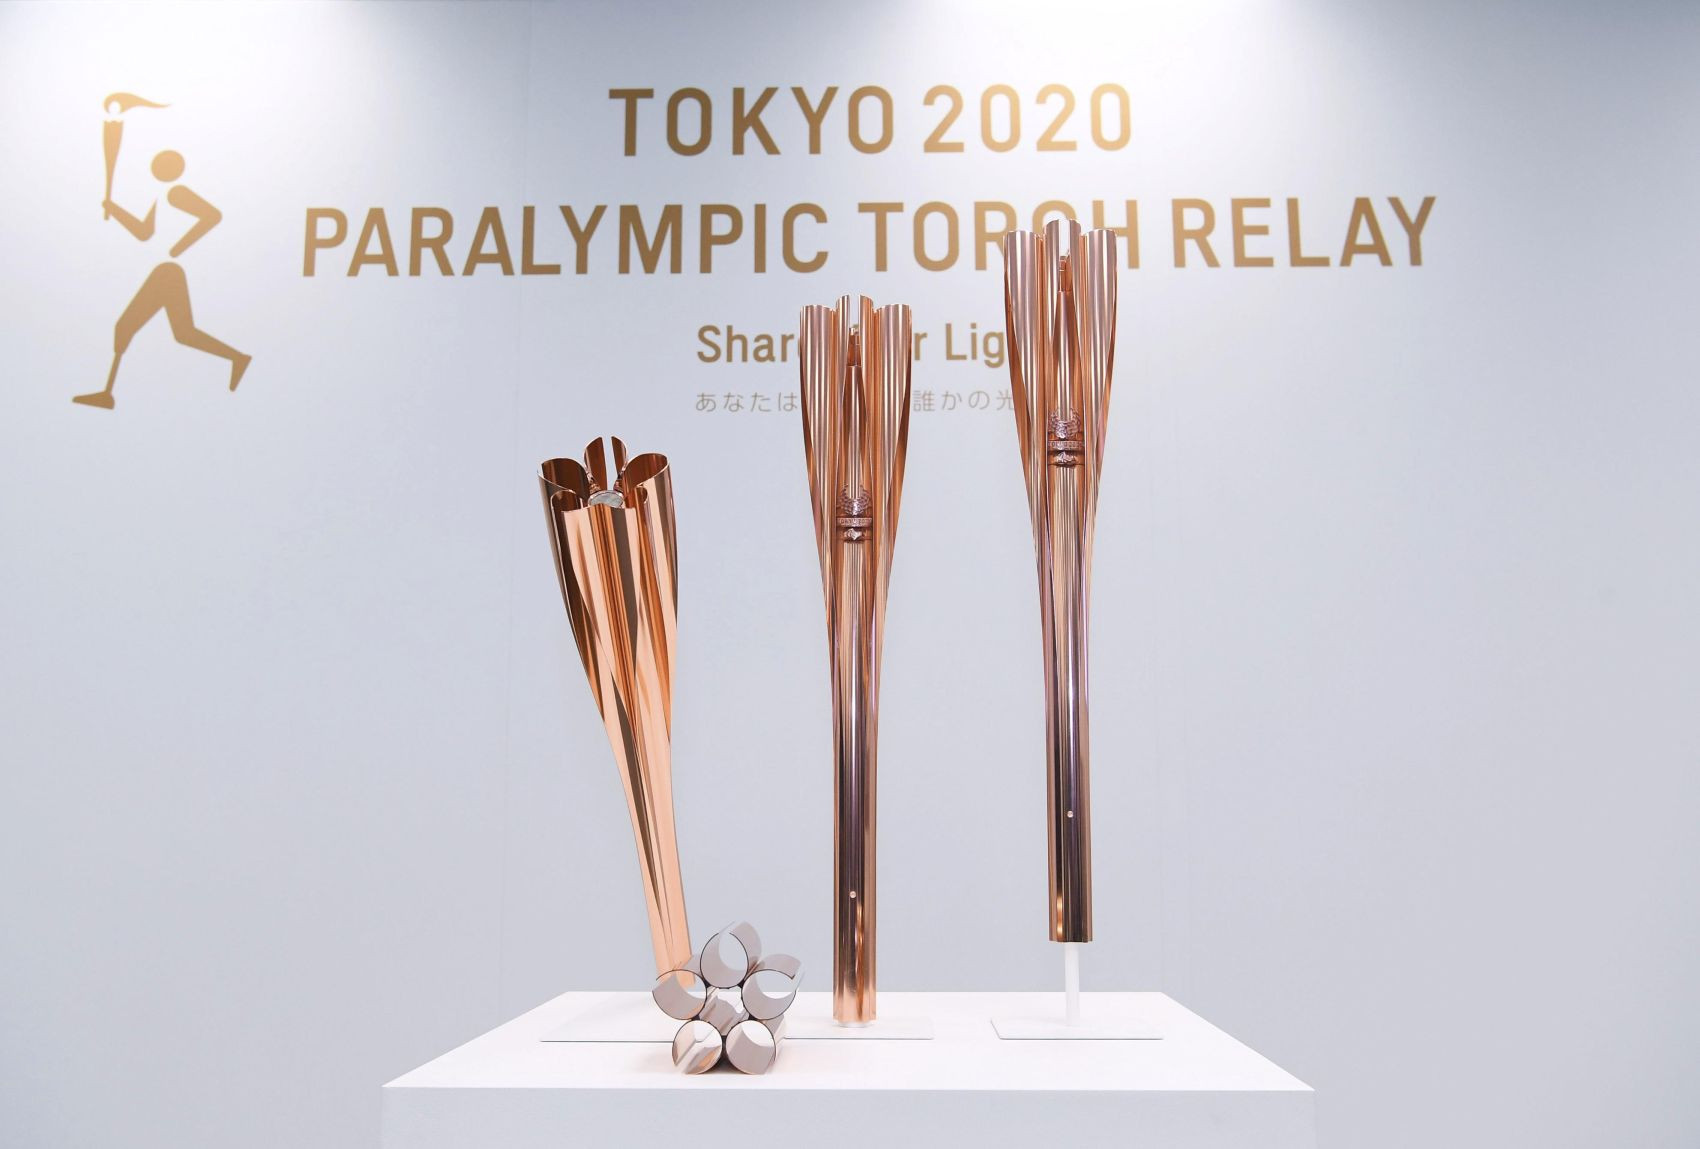 Stoke Mandeville Stadium will play a starring role in the Paralympic Torch Relay for Tokyo 2020 ©Tokyo 2020